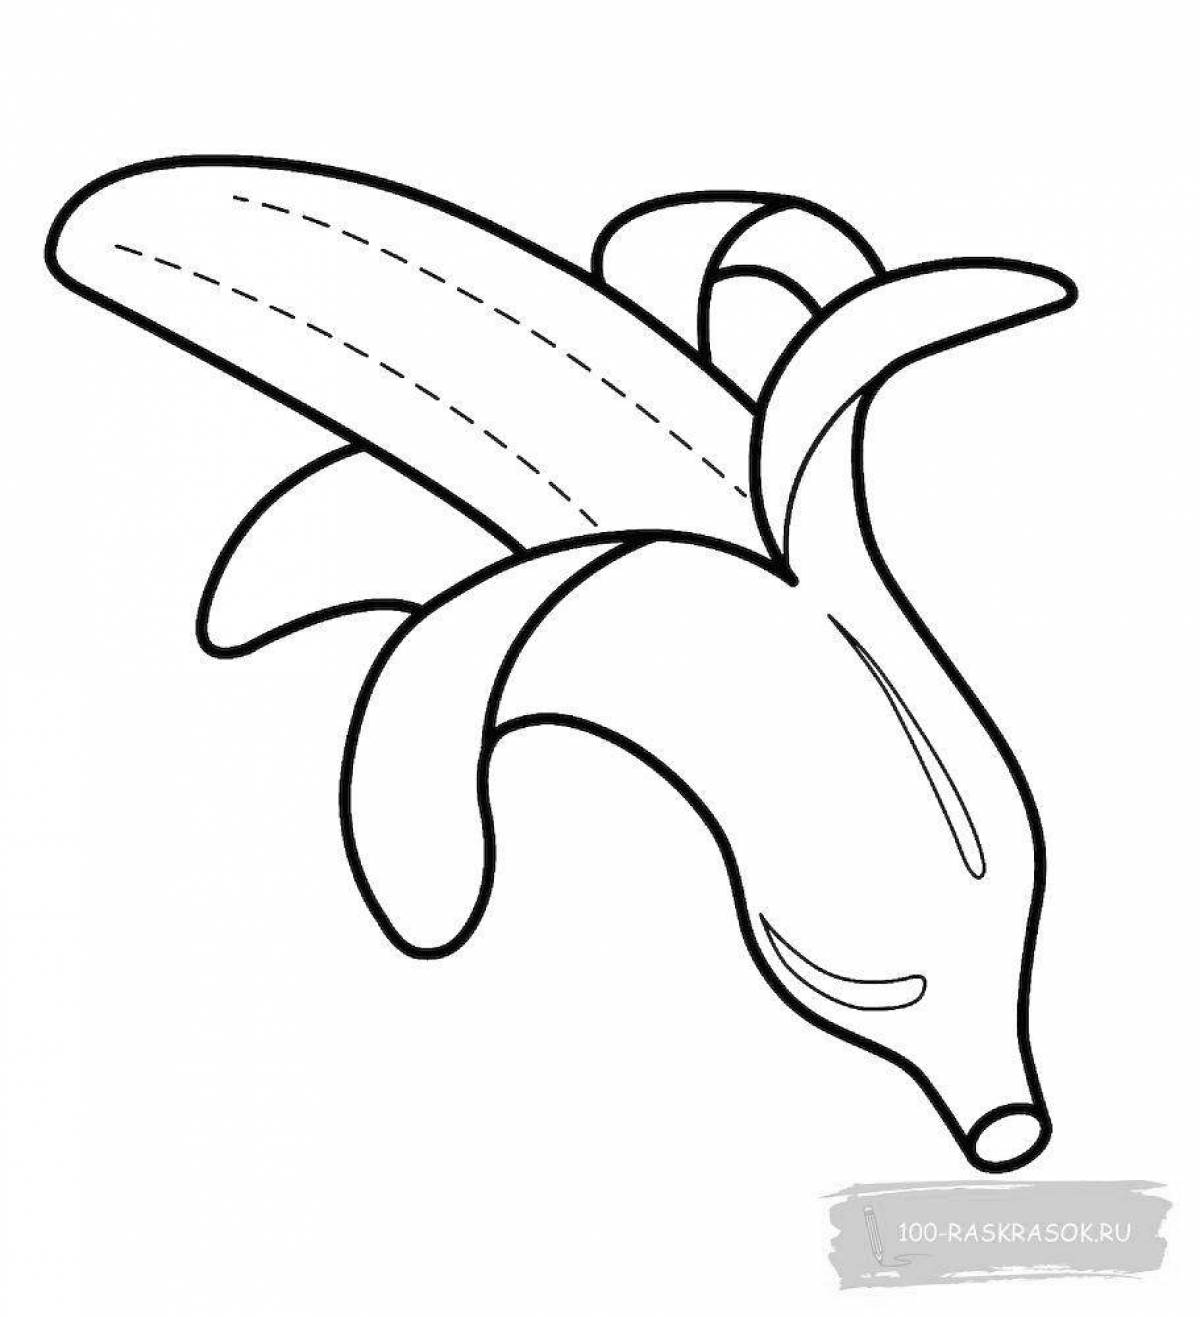 Colorful banana coloring book for 2-3 year olds